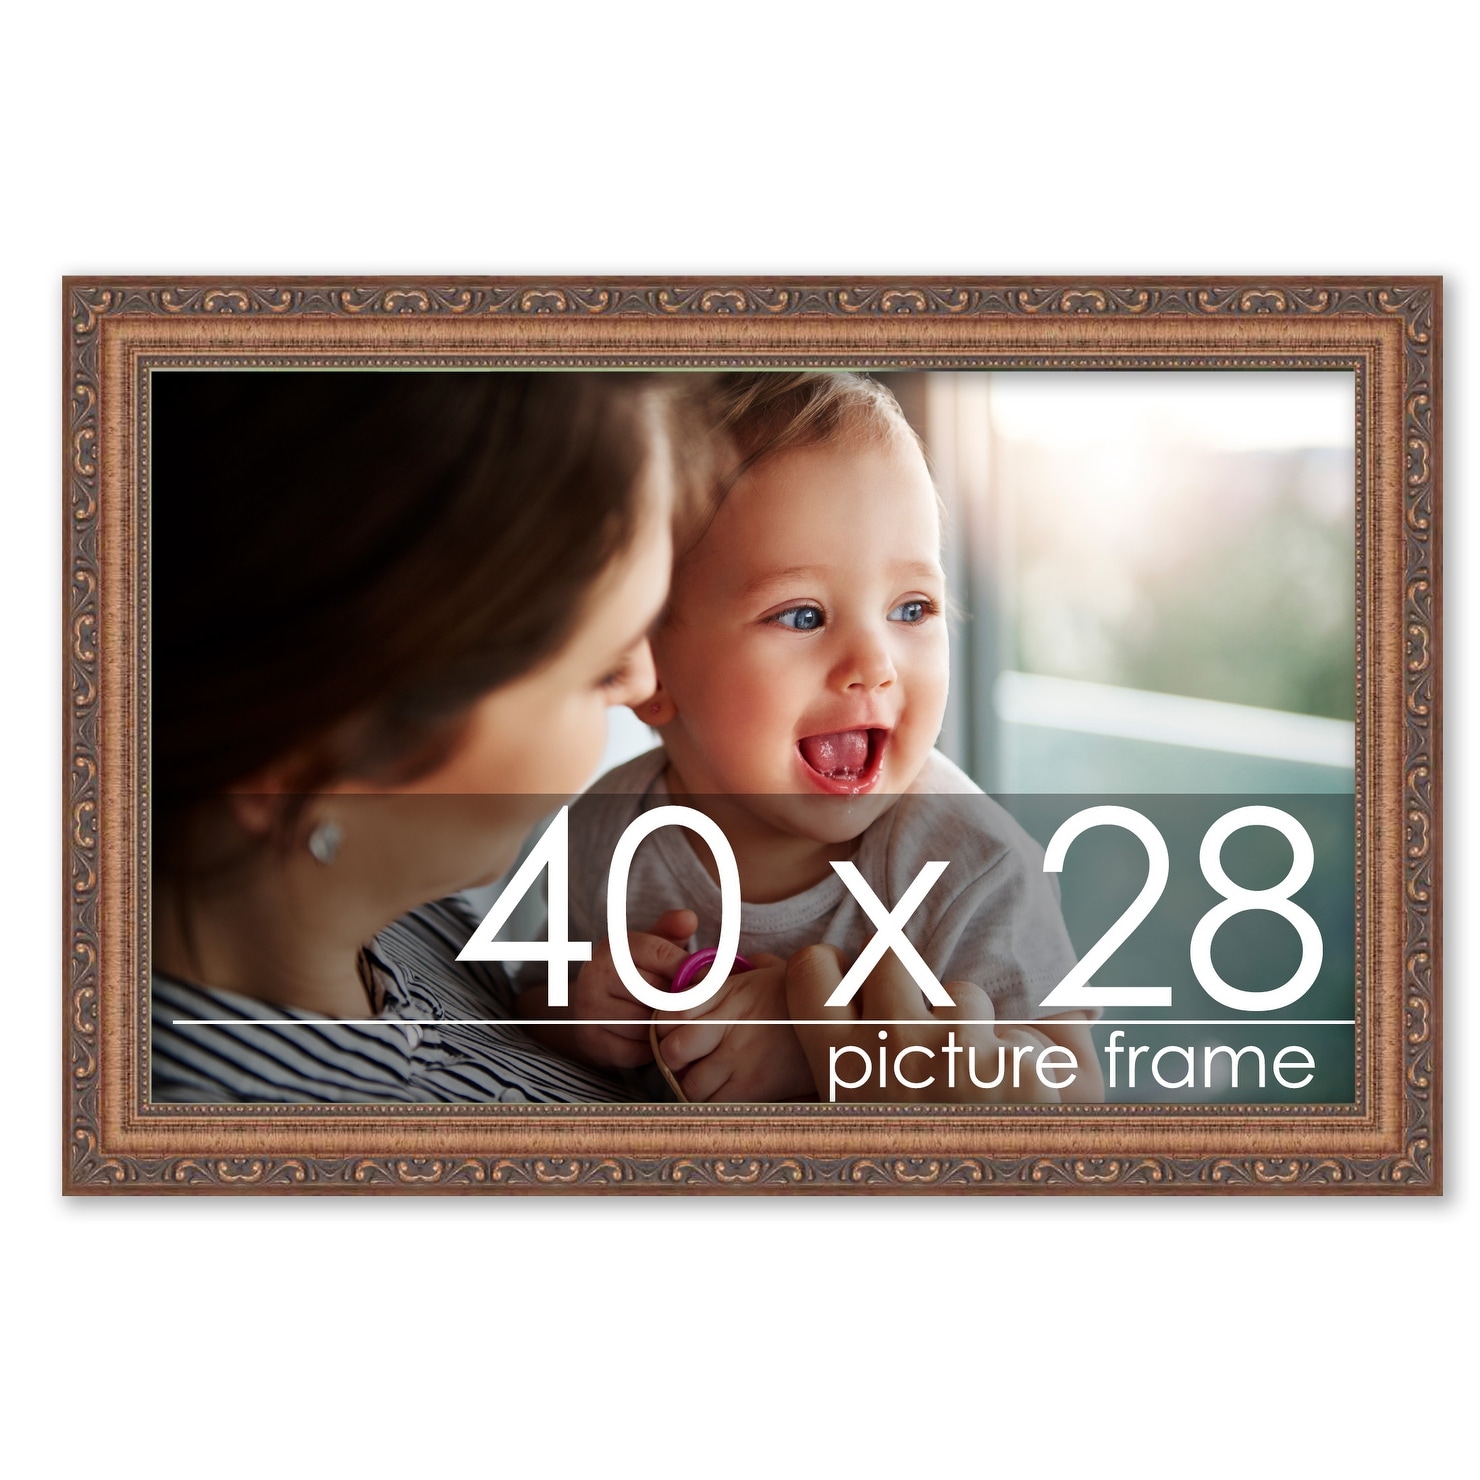 4x10 - 4 x 10 Flat Black Solid Wood Frame with UV Framer's Acrylic & Foam Board Backing - Great for